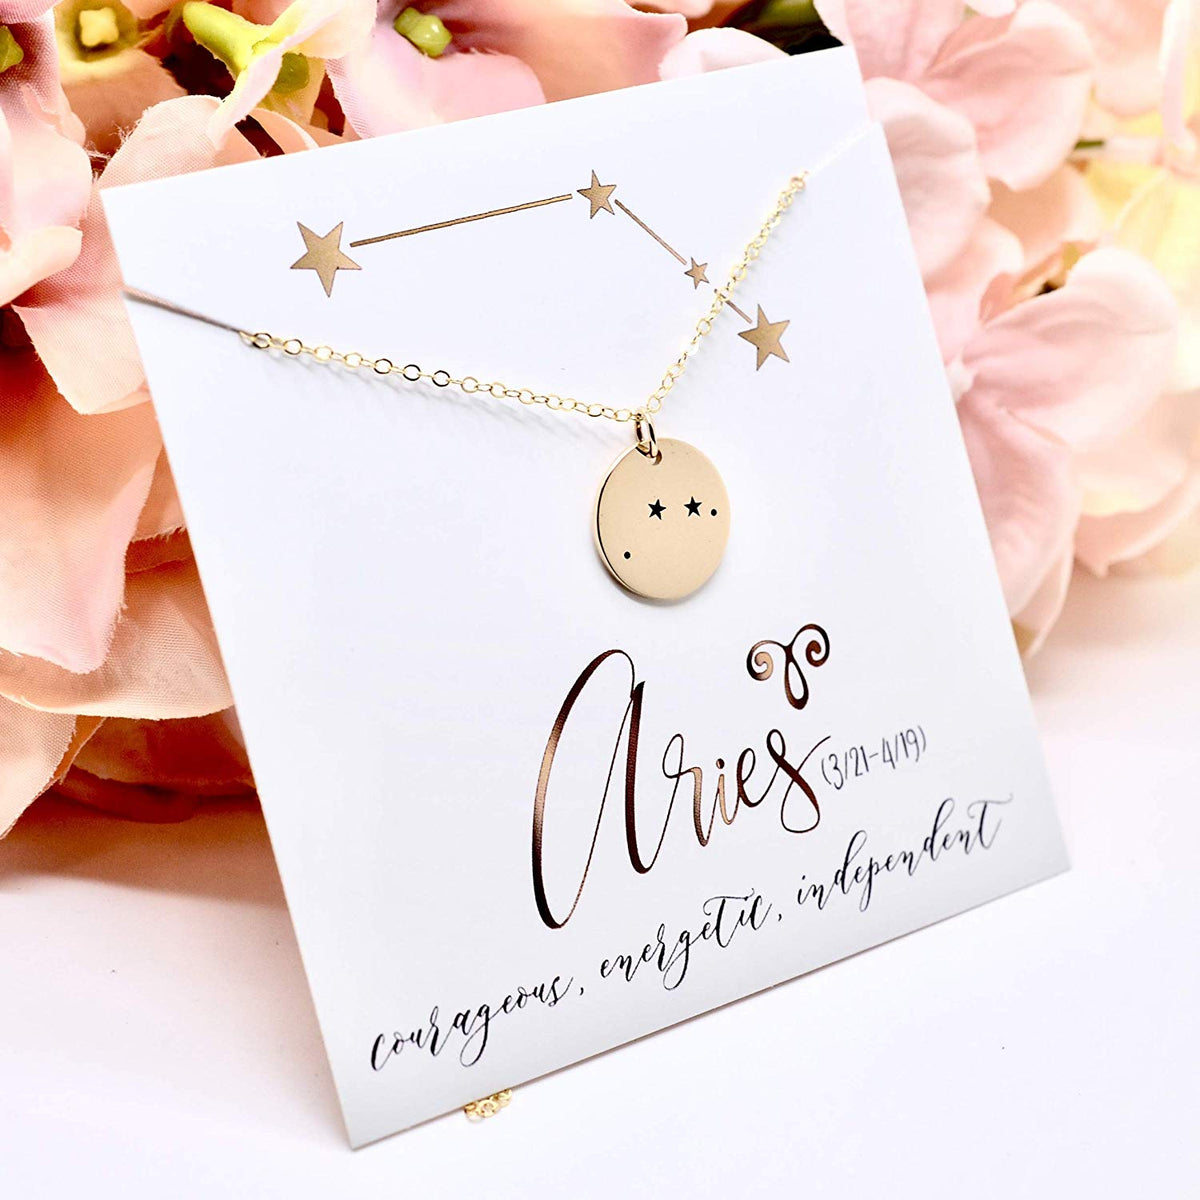 Aries Zodiac Sign 14K Gold Filled Constellation Necklace - Love It Personalized